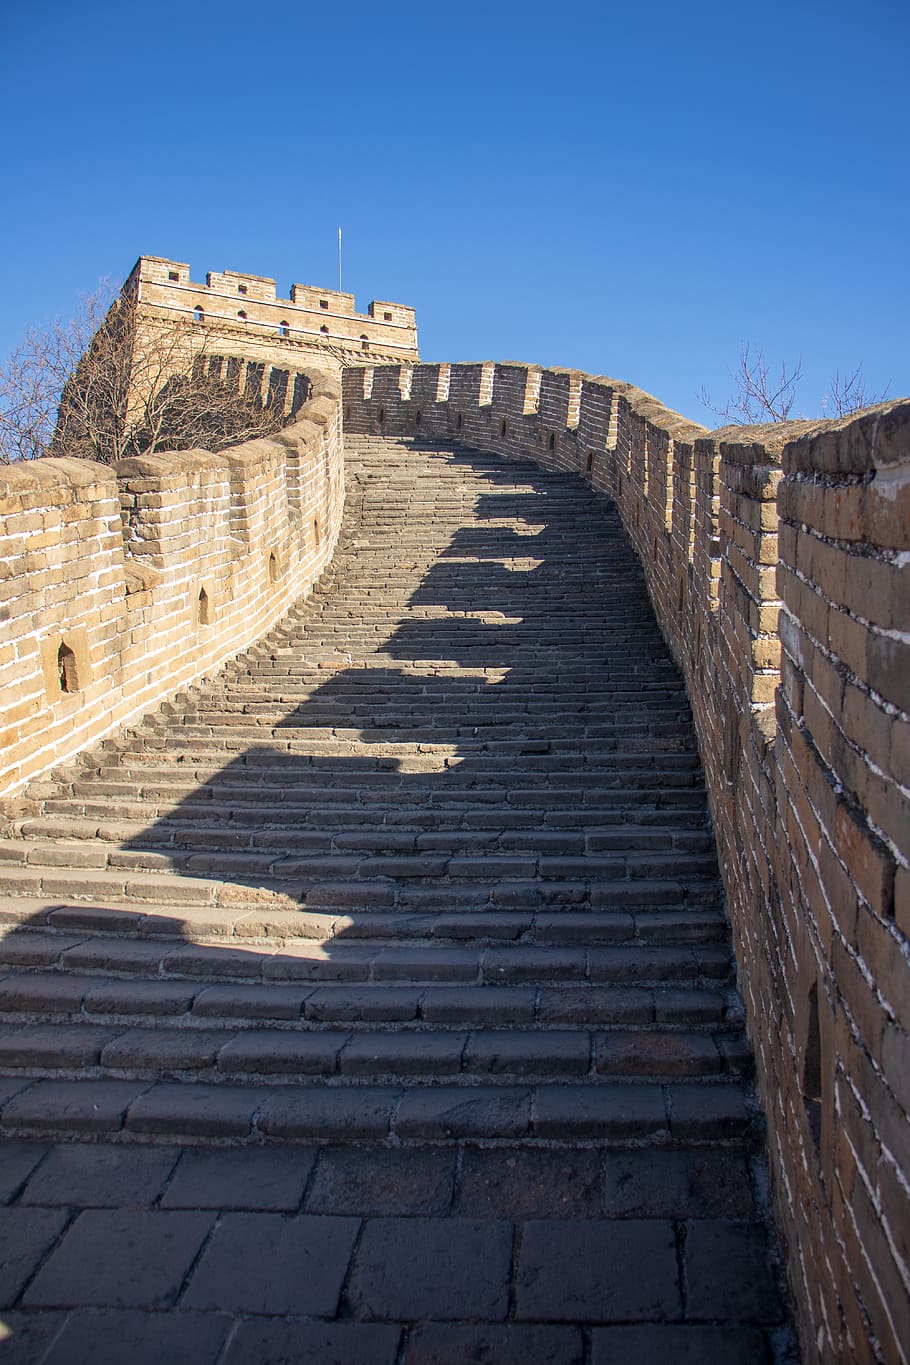 great wall, china, wall, landmark, building, architecture, ancient, famous, mountains, historically